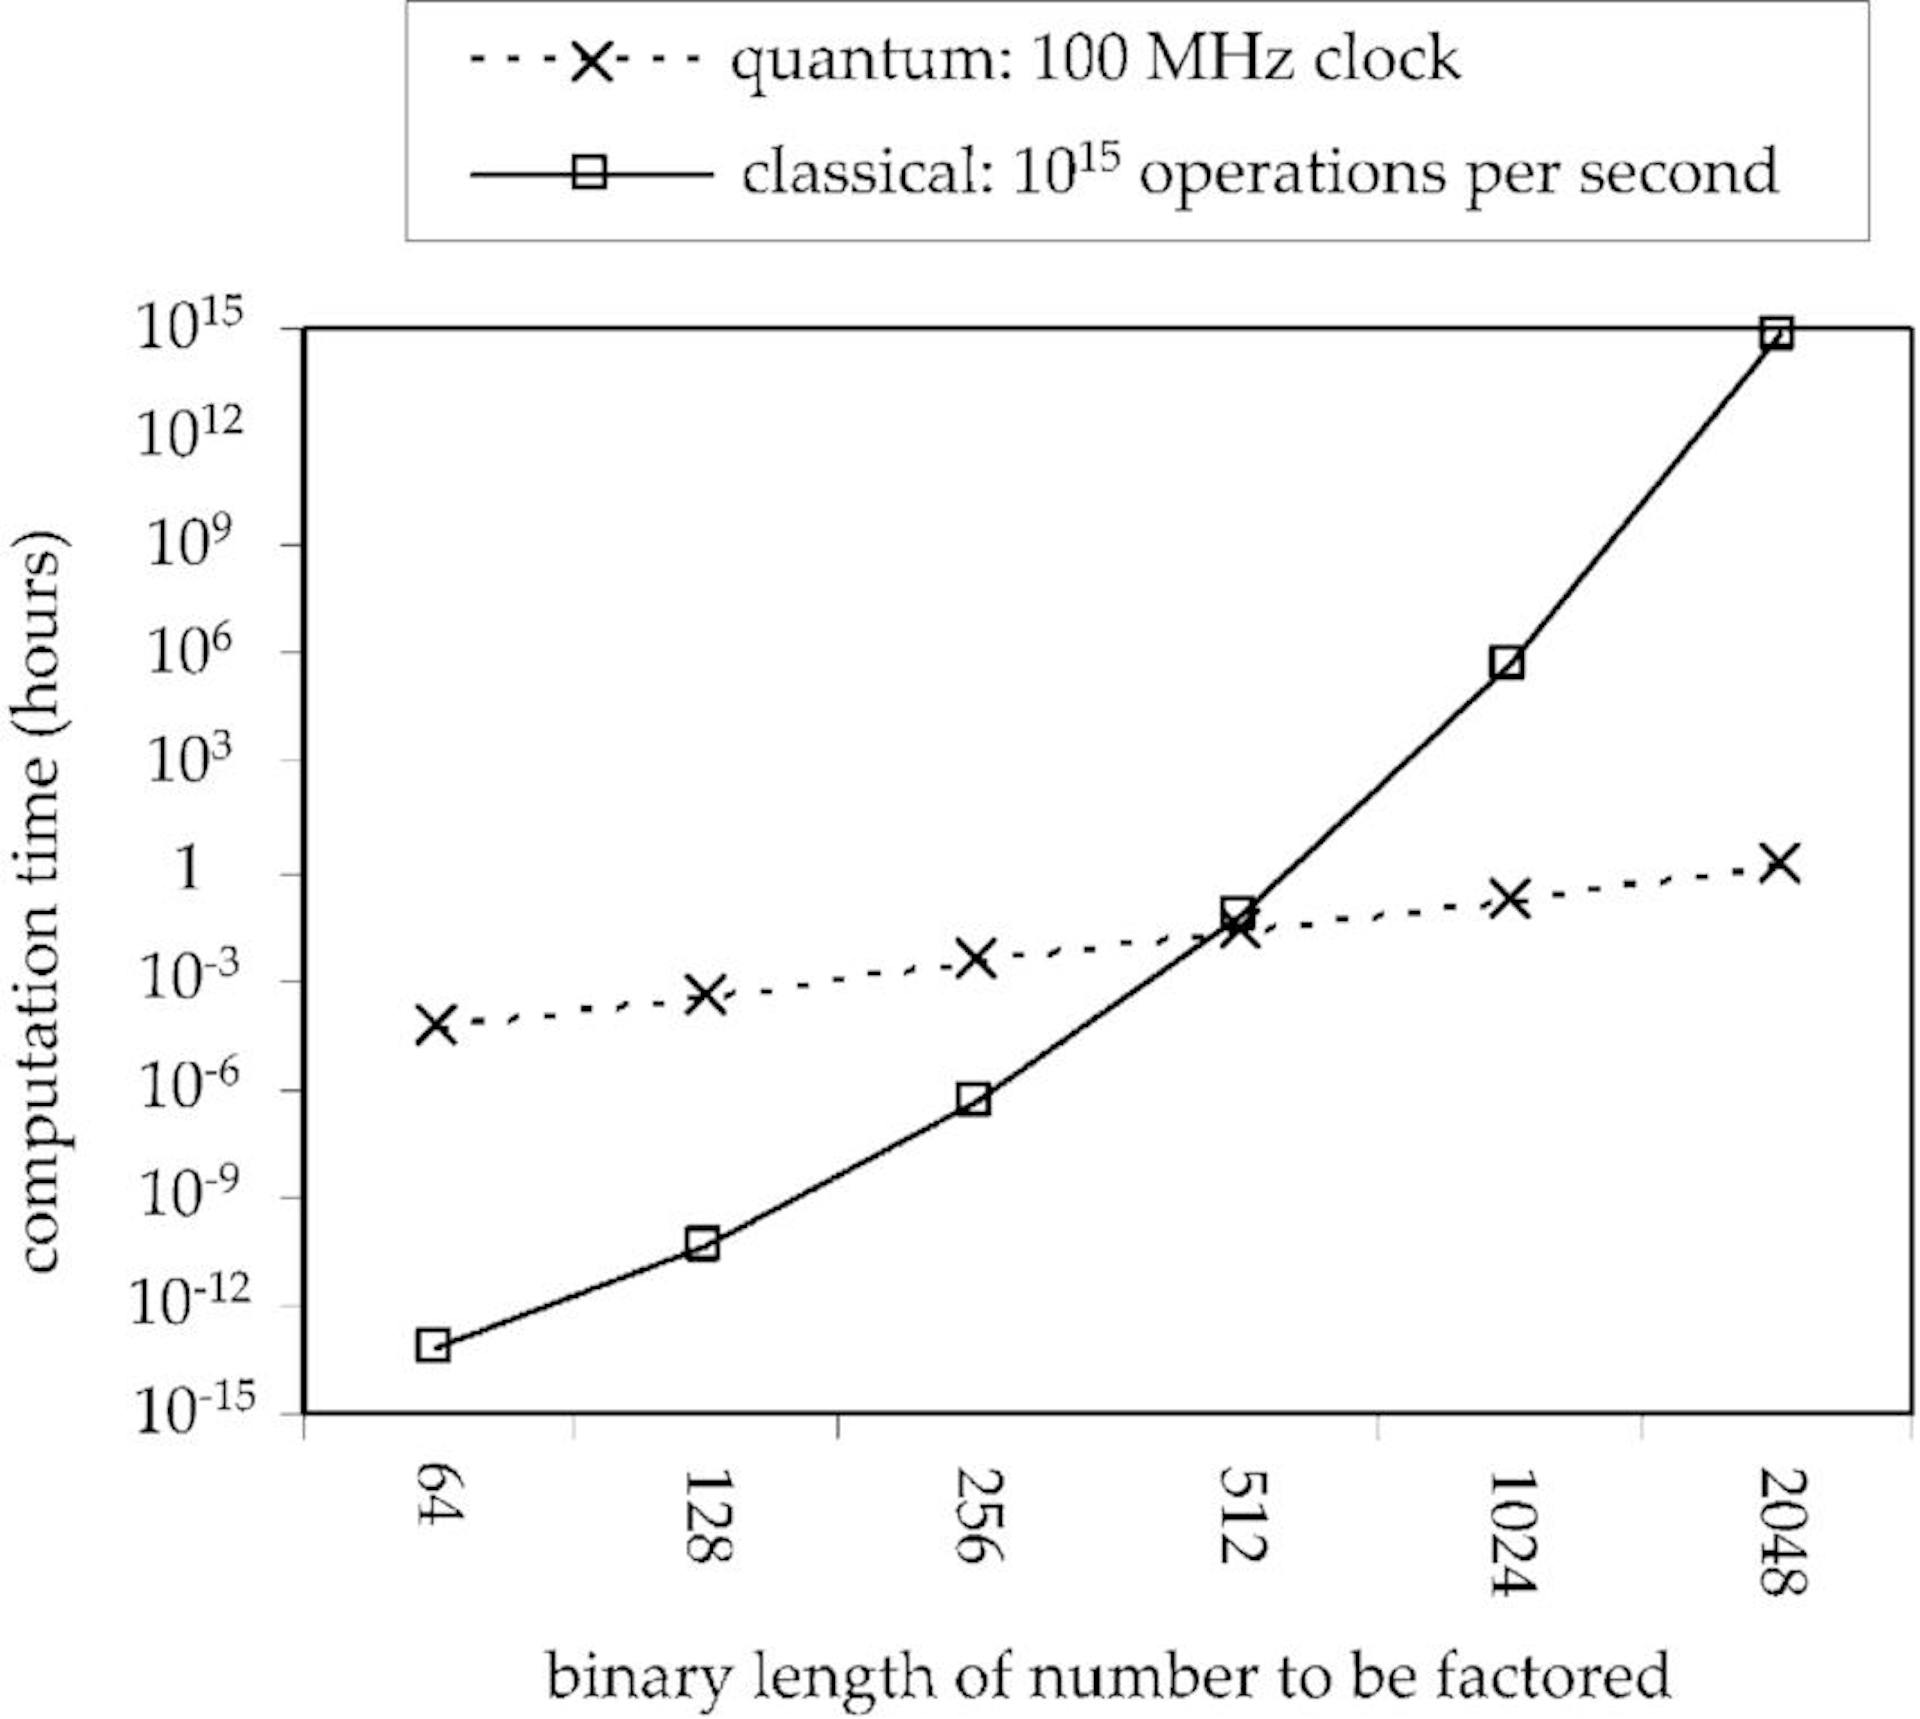 Quelle – https://www.researchgate.net/figure/Comparison-of-estimated-computation-time-in-hours-for-the-problem-of-factoring-numbers-of_fig1_2986358